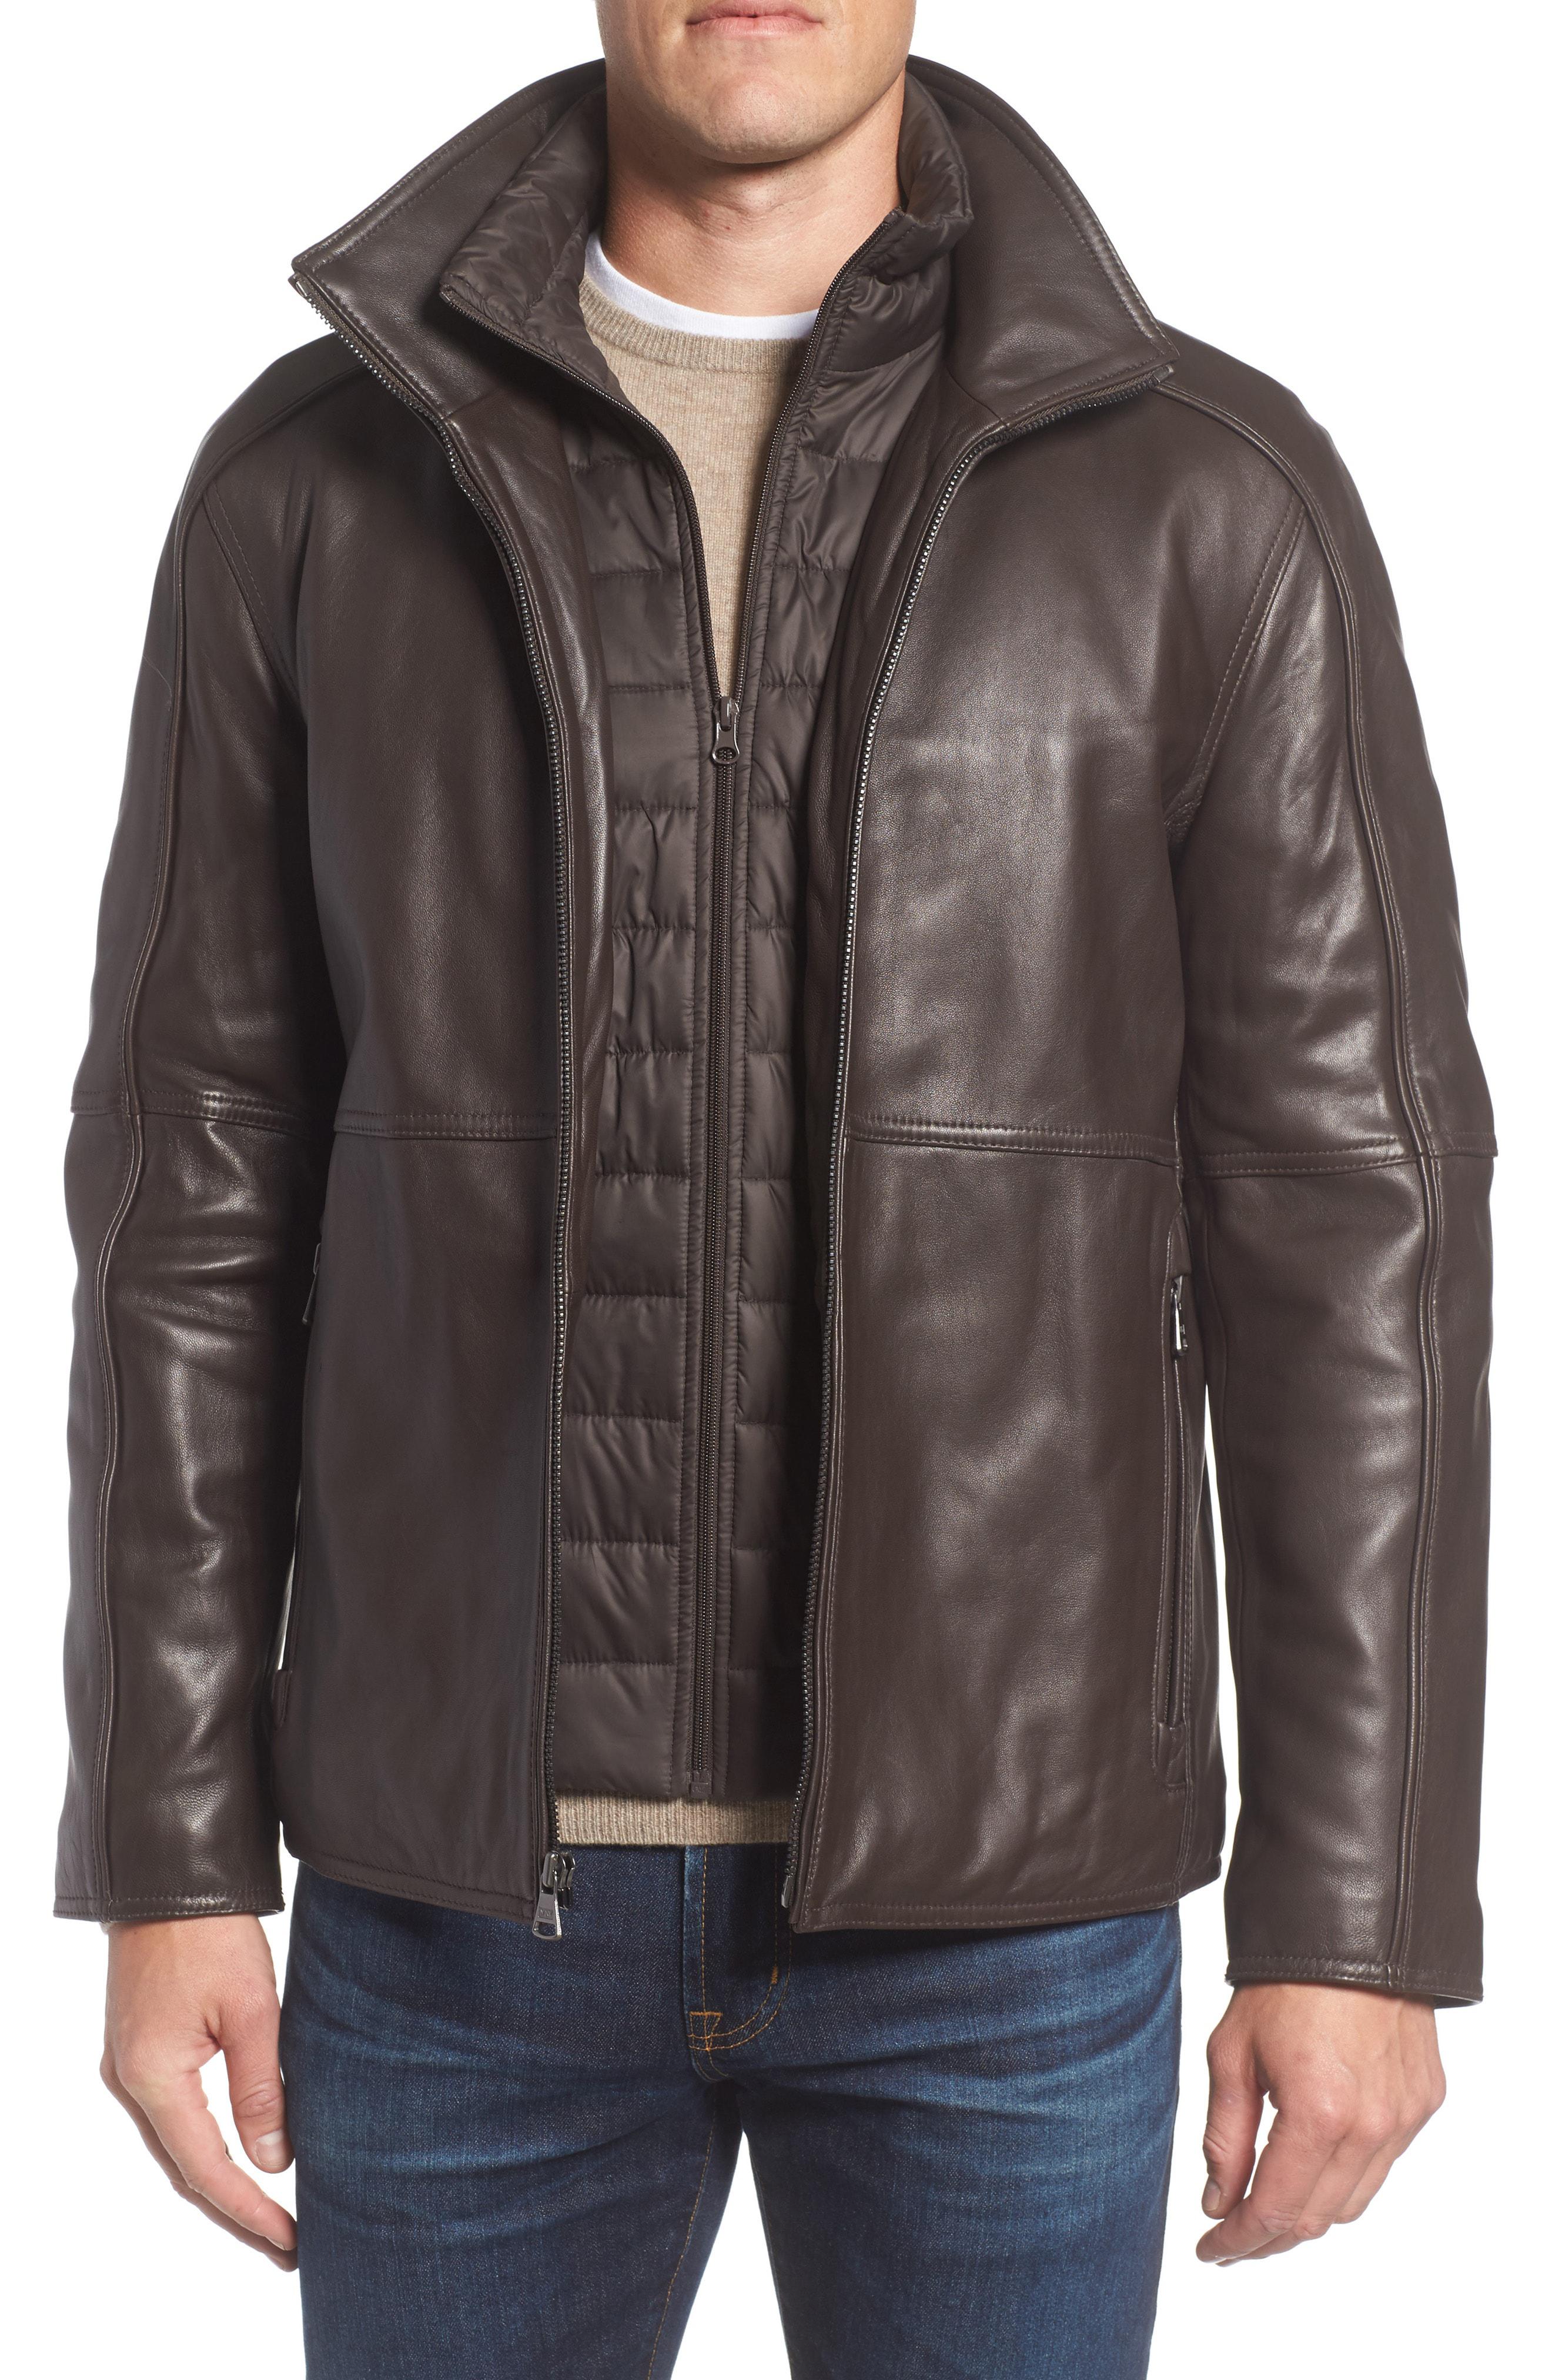 Lyst - Marc New York Hartz Leather Jacket With Quilted Bib for Men